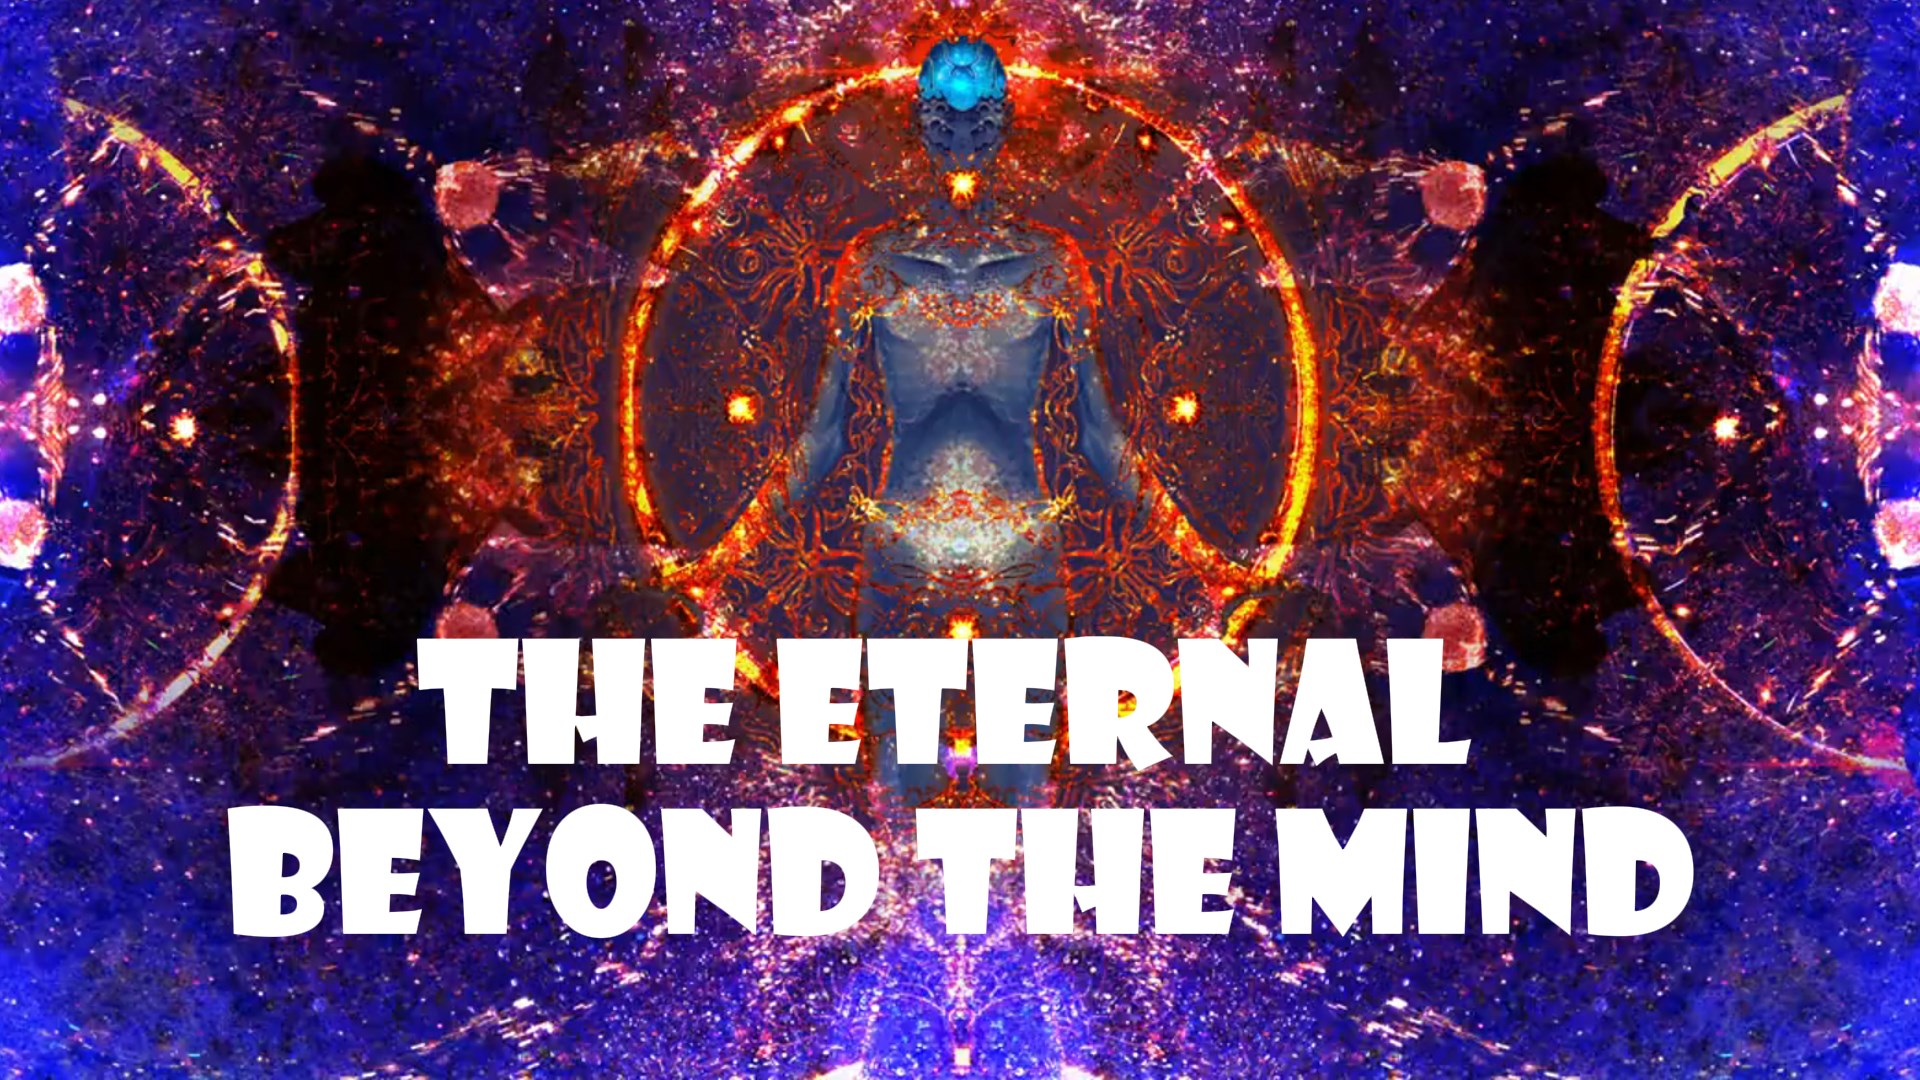 The Eternal Beyond the Mind